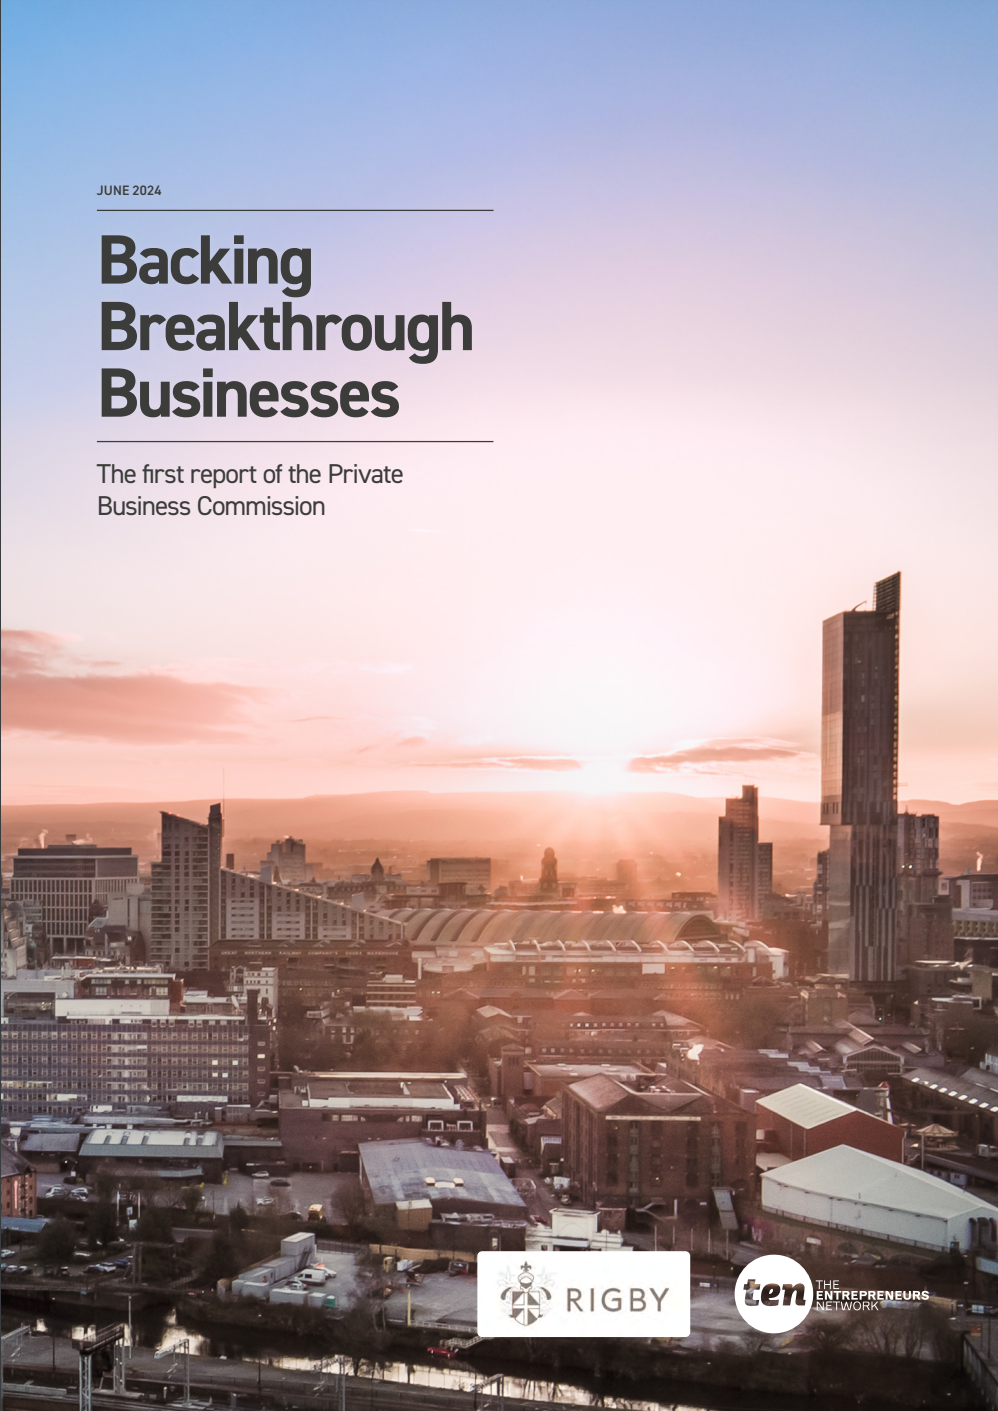 Private Business Commission launches ‘Backing Breakthrough Business’ report